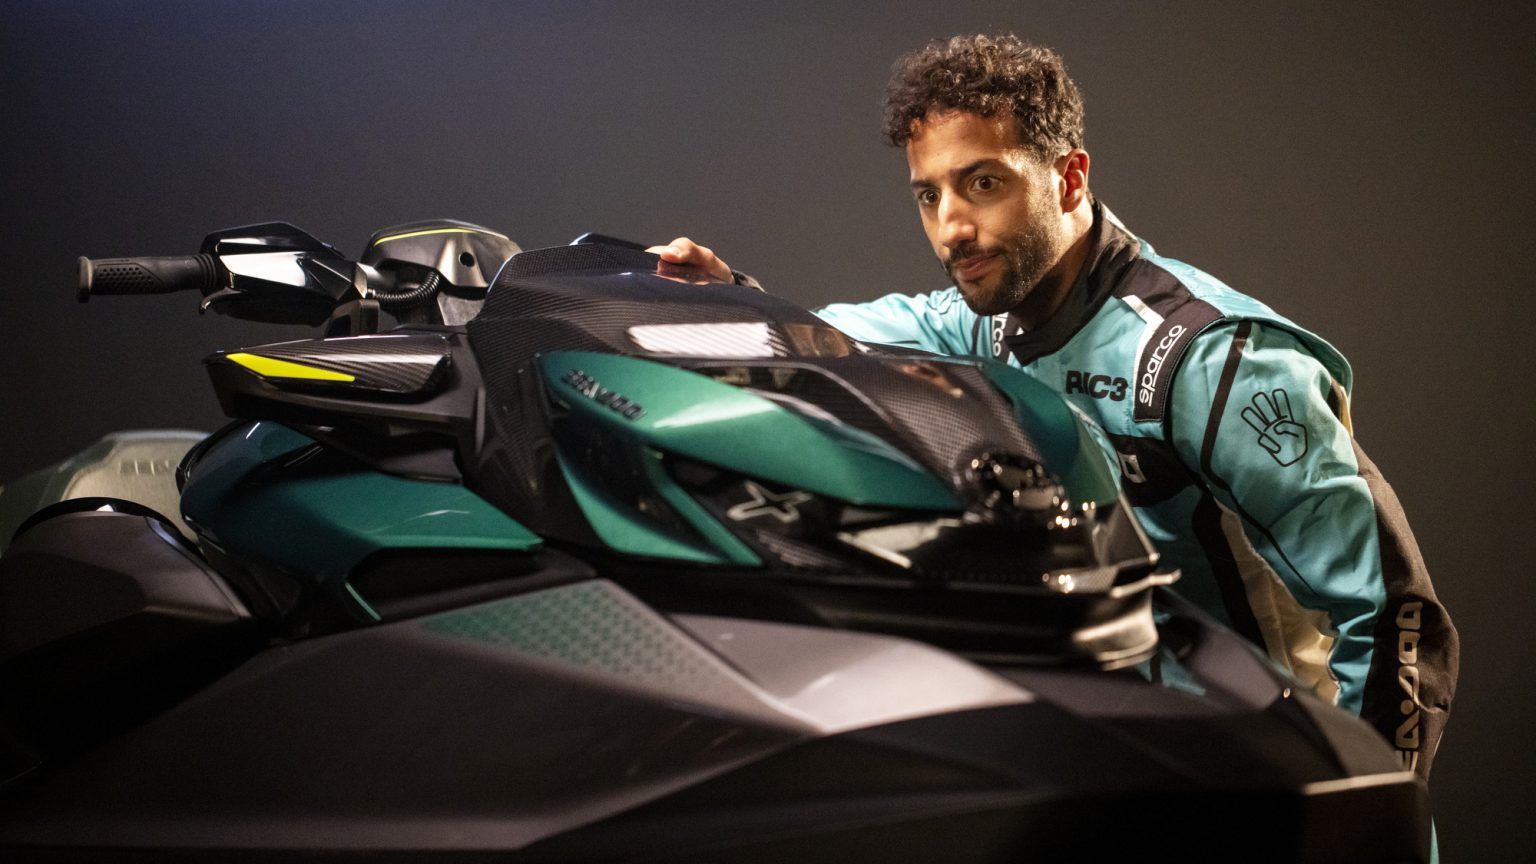 2023 SeaDoo RXPX Apex RS 300 sold out in Australia before it arrives